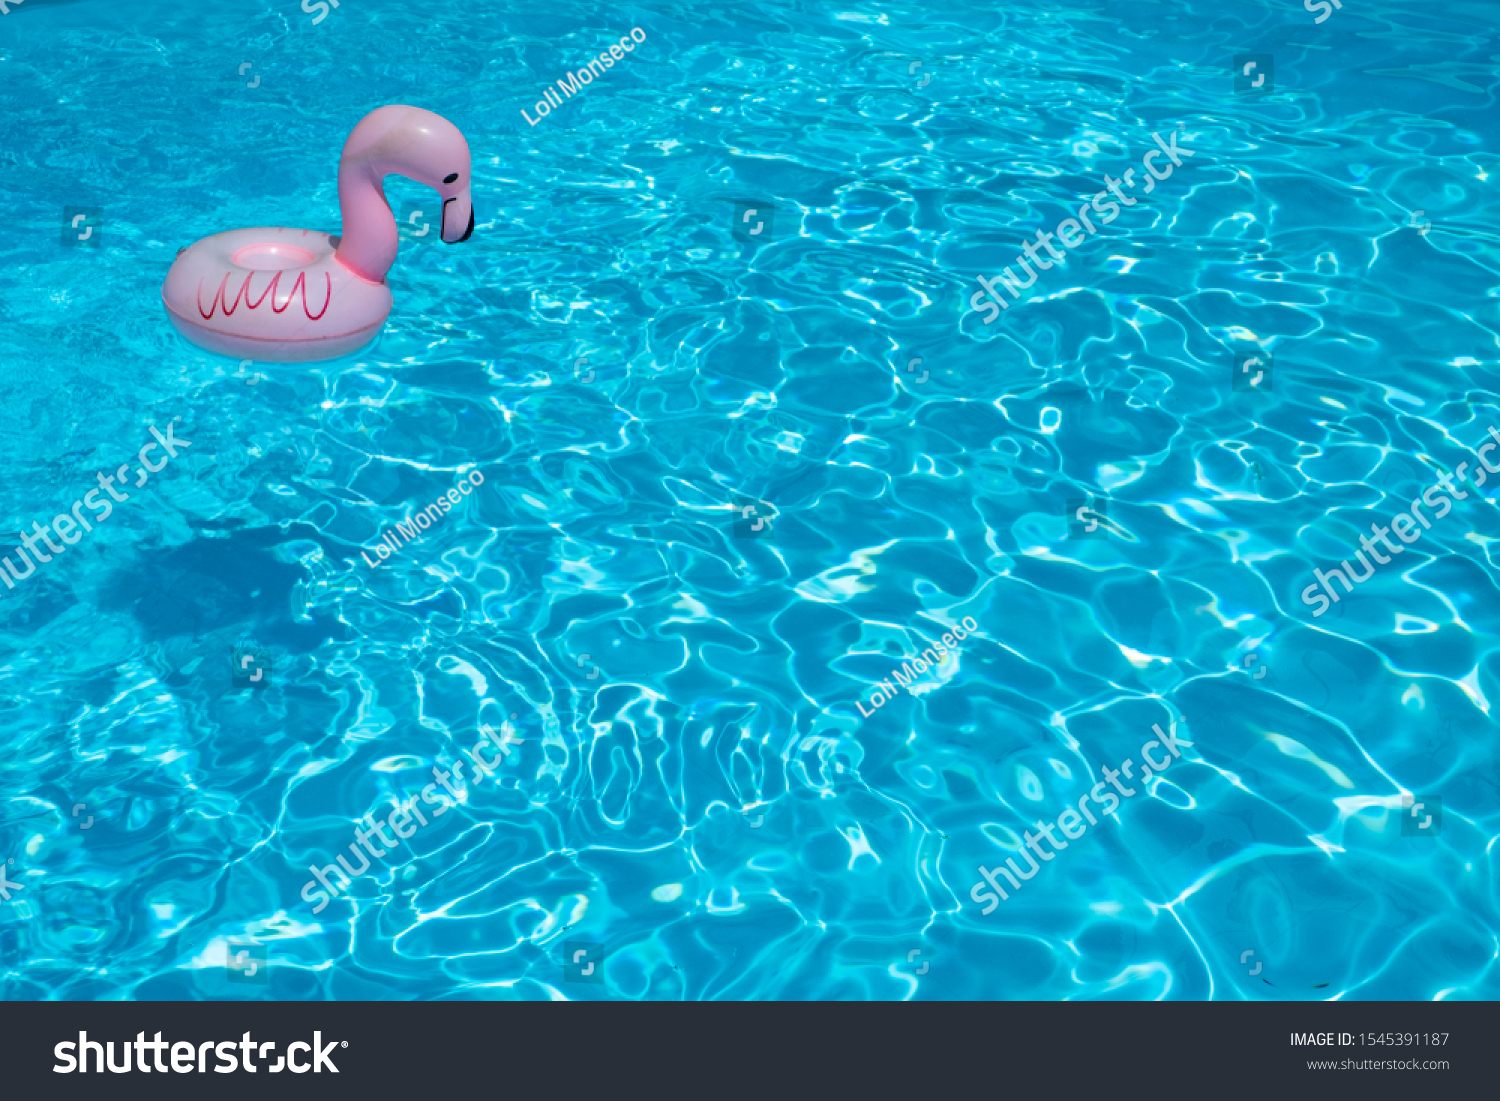 detail of a flamingo-shaped float, which floats freely smile the blue water of a swimming pool #1545391187